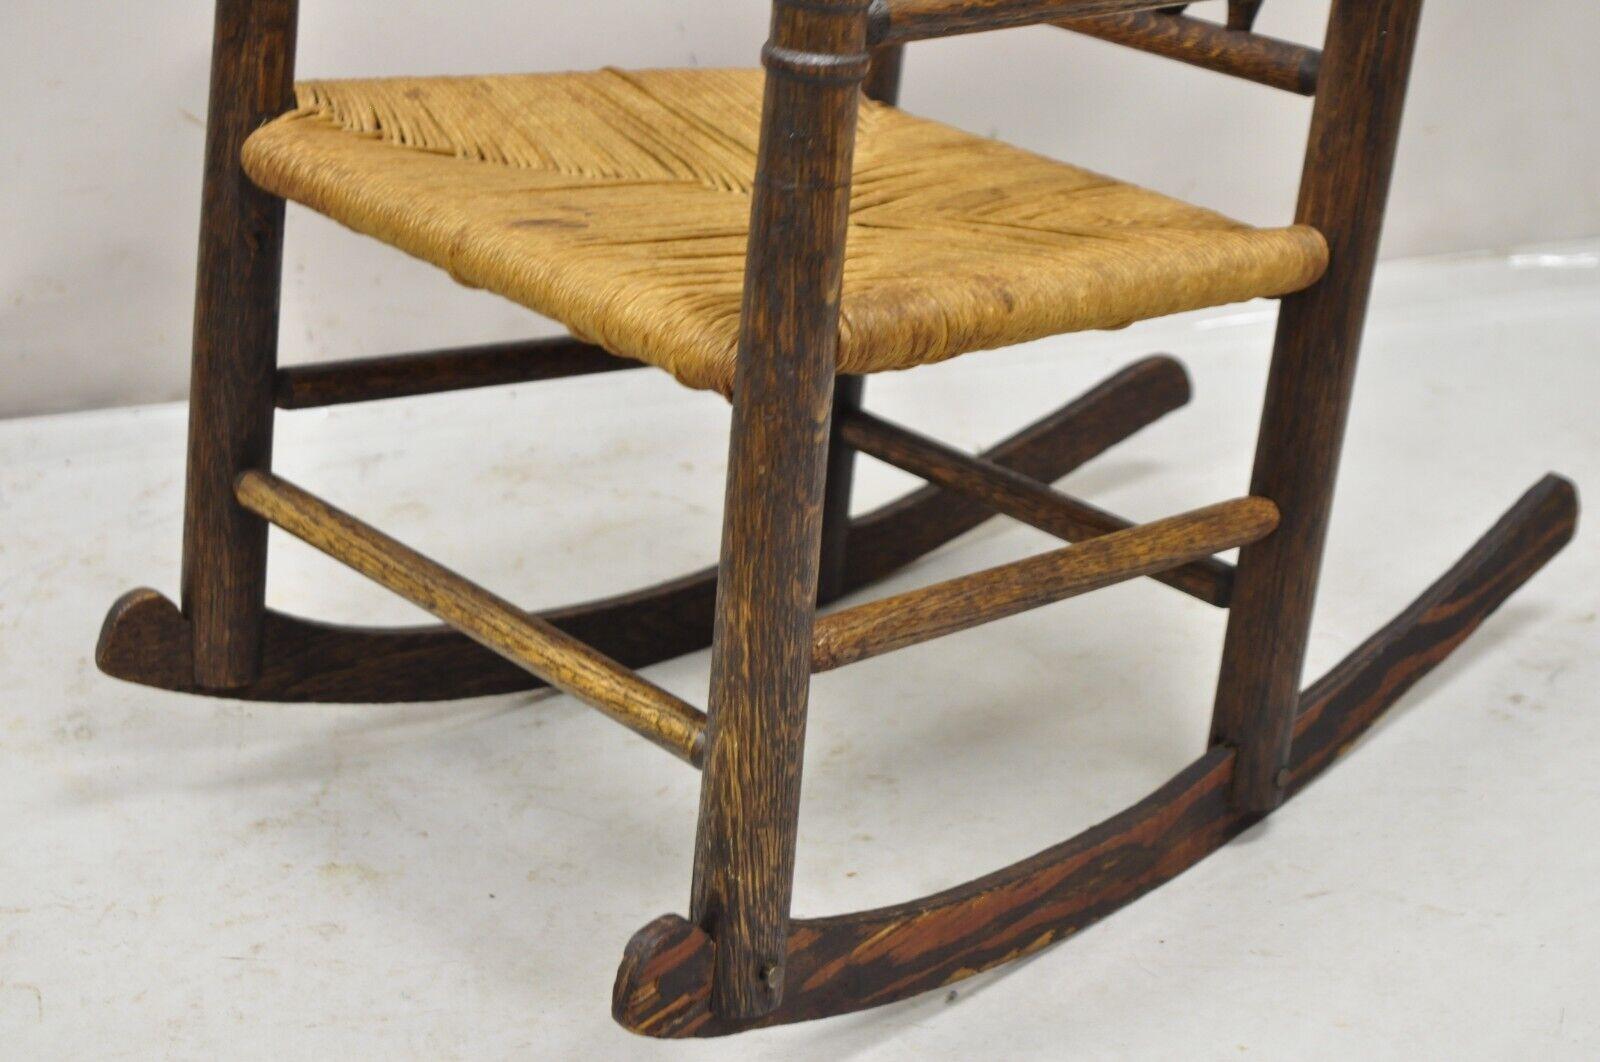 19th Century Antique Arts & Crafts Victorian Oak Wood Rush Seat Small Child's Rocking Chair For Sale